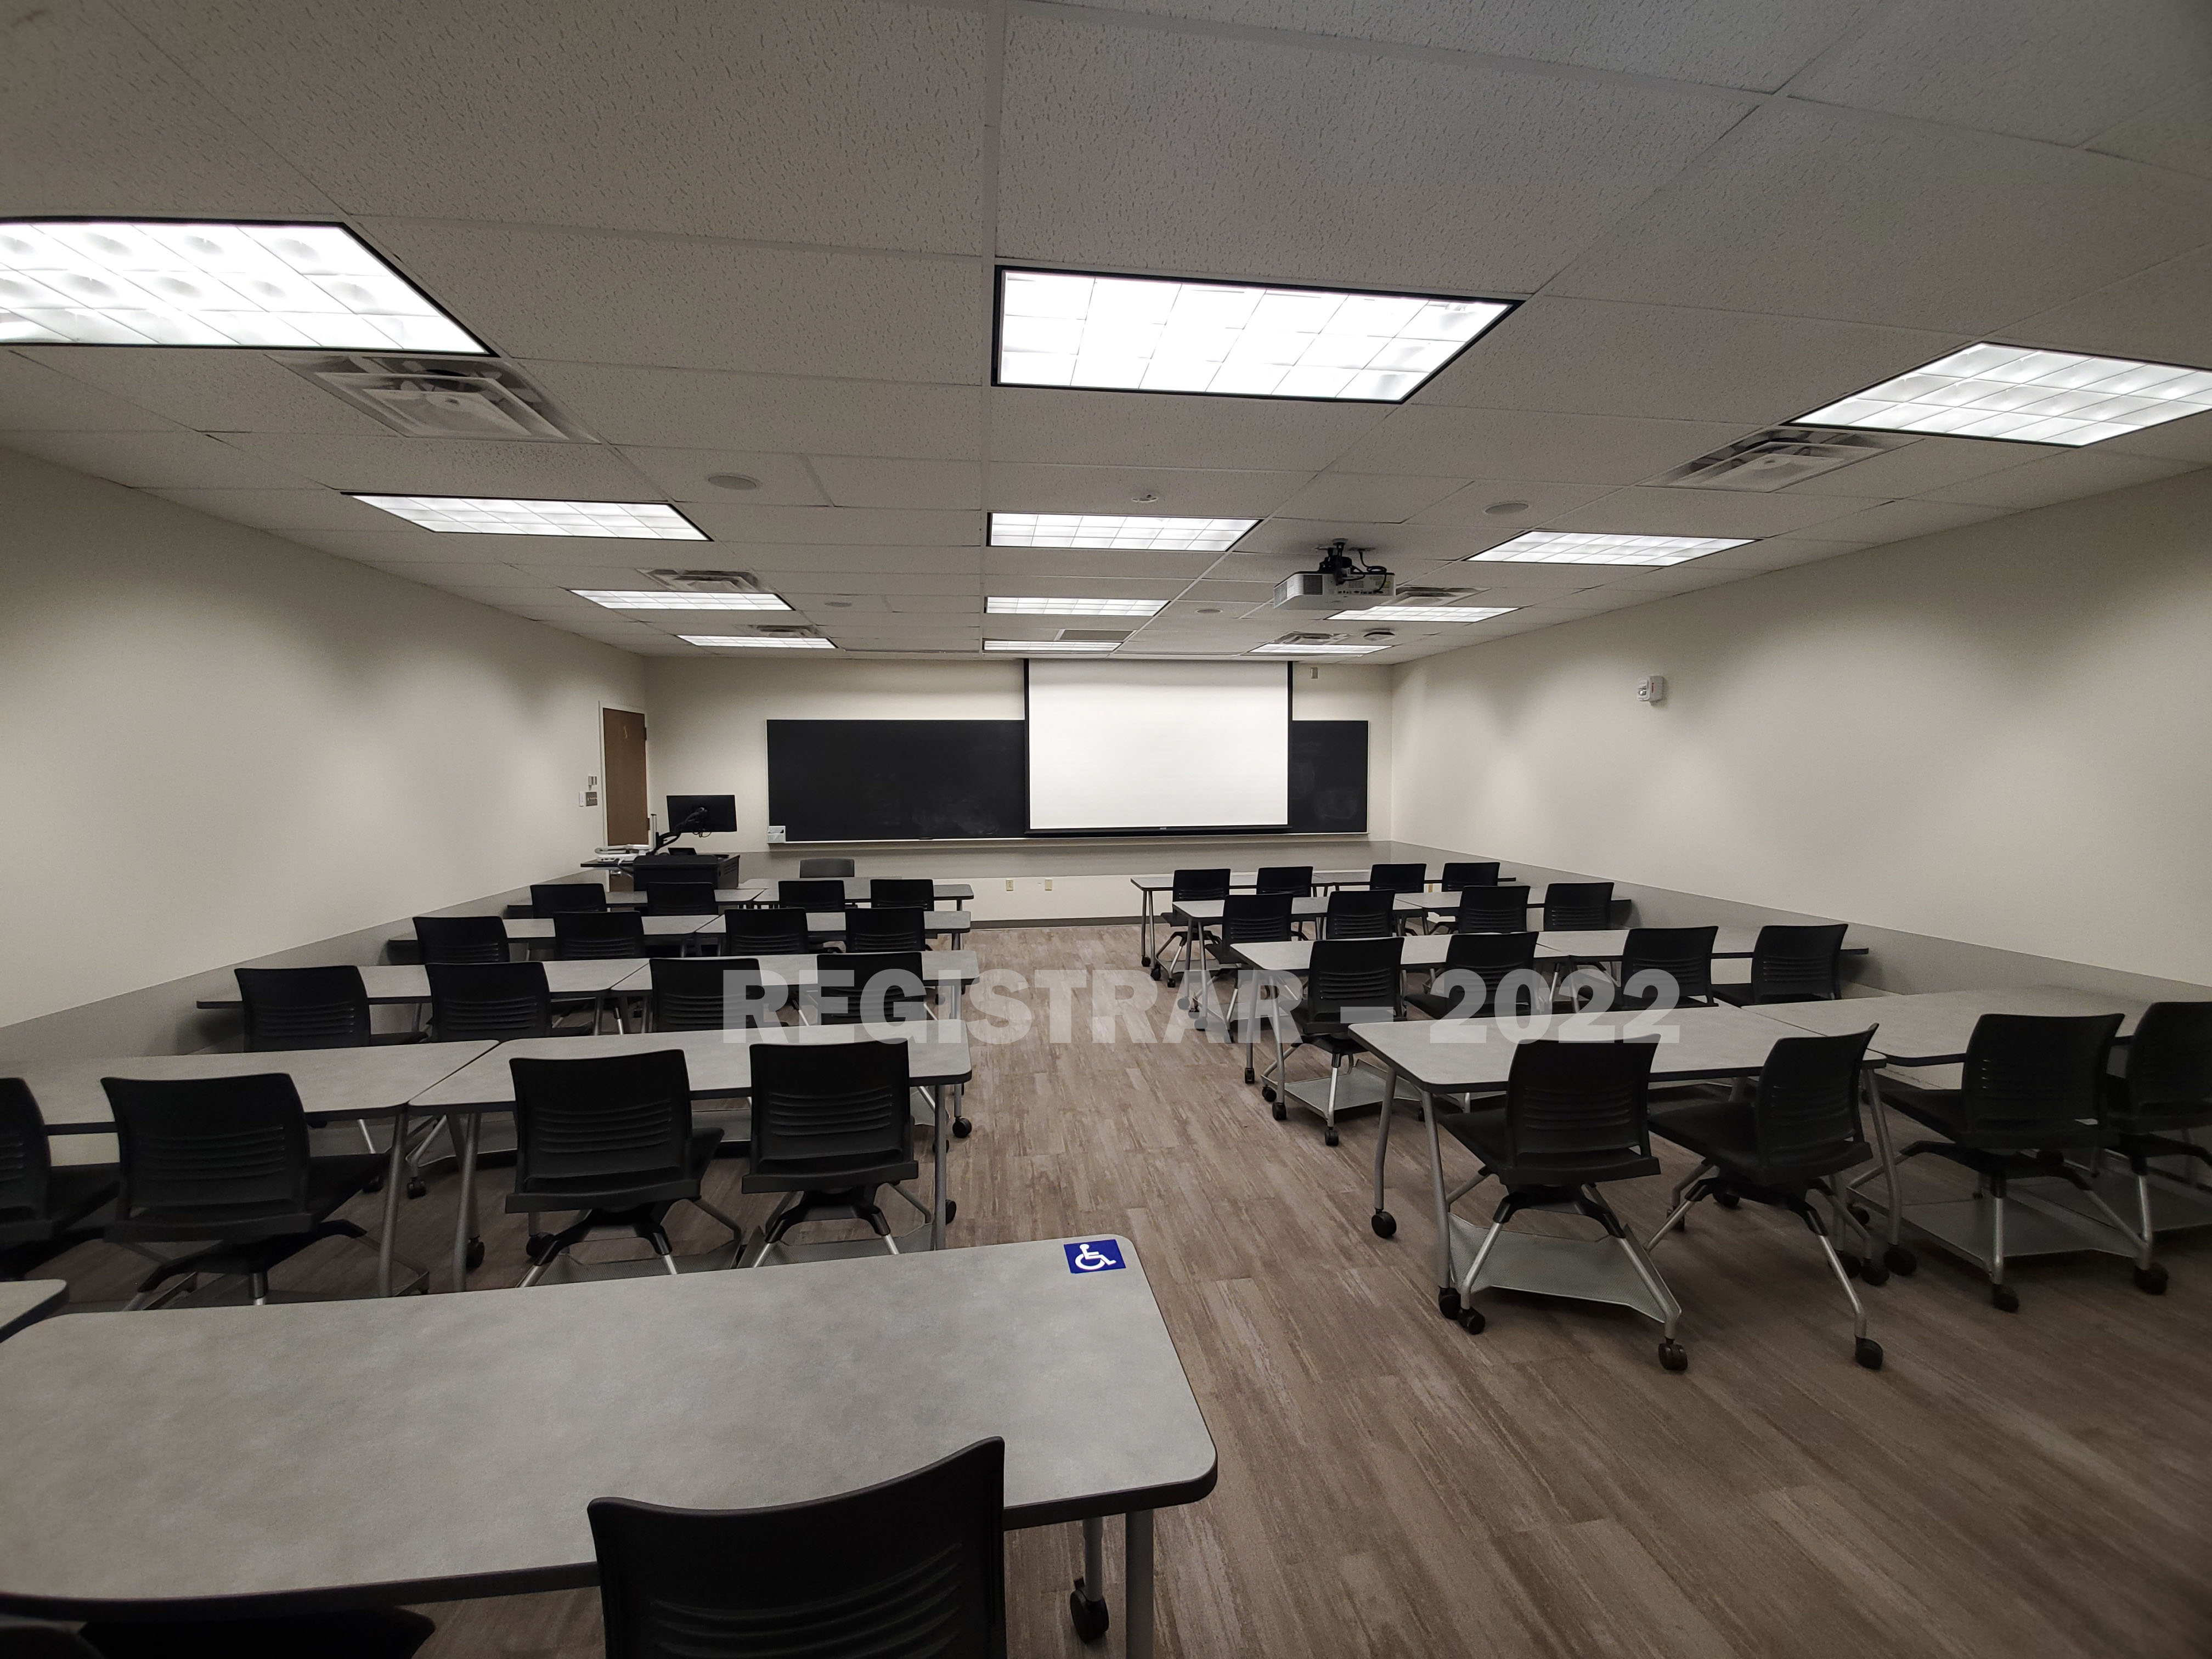 Dreese Lab room 317 ultra wide angle view from the back of the room with projector screen down